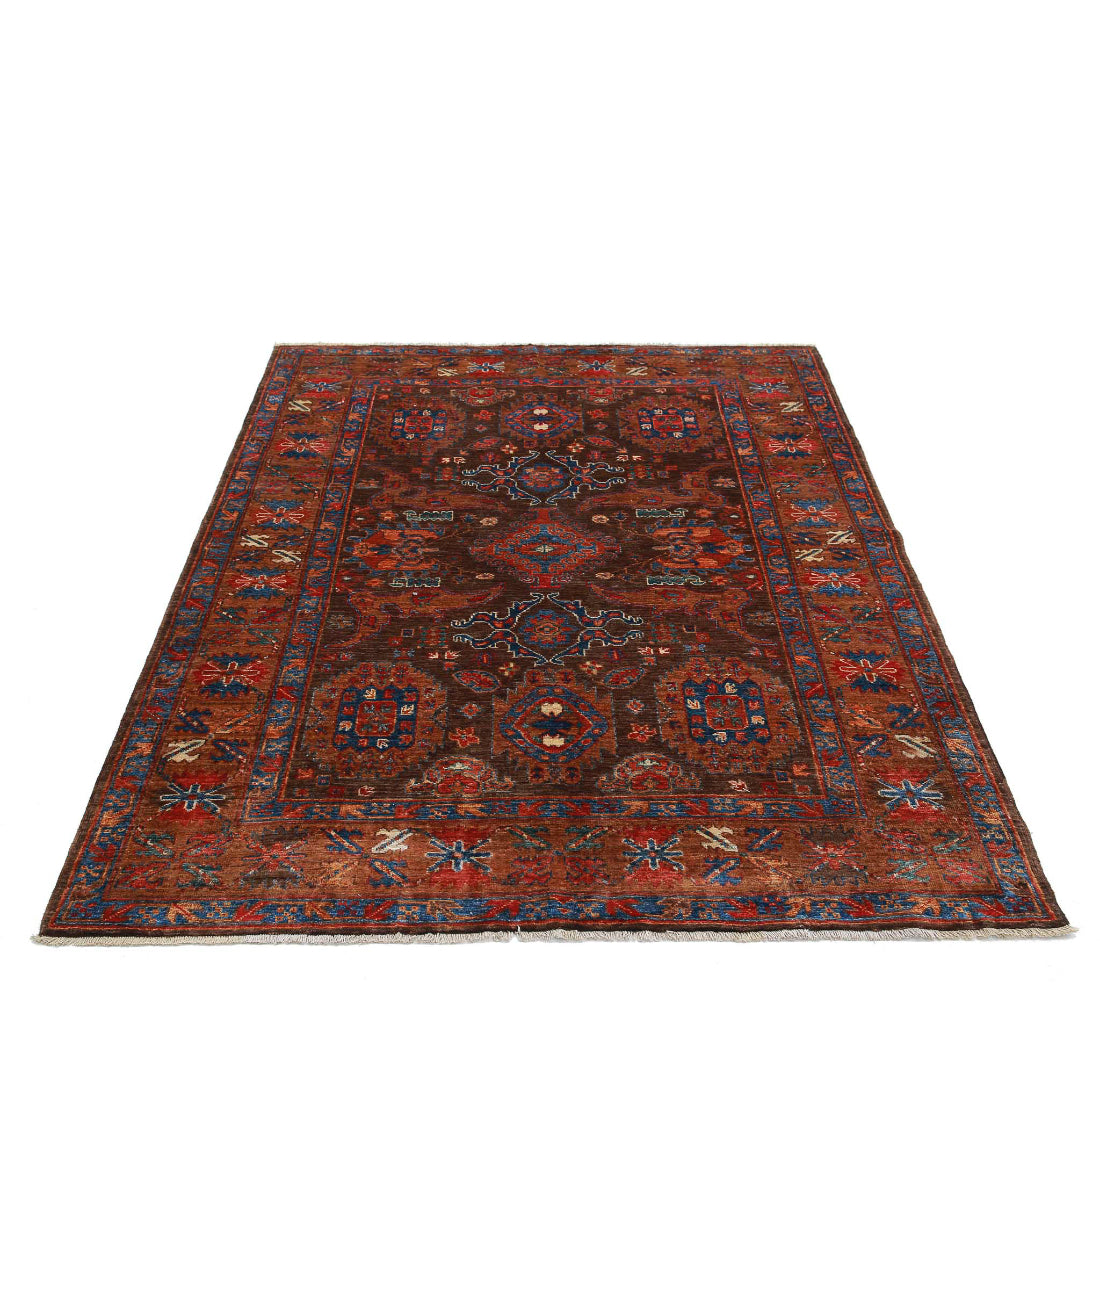 Hand Knotted Nomadic Caucasian Humna Wool Rug - 5'1'' x 6'4'' 5'1'' x 6'4'' (153 X 190) / Brown / Gold